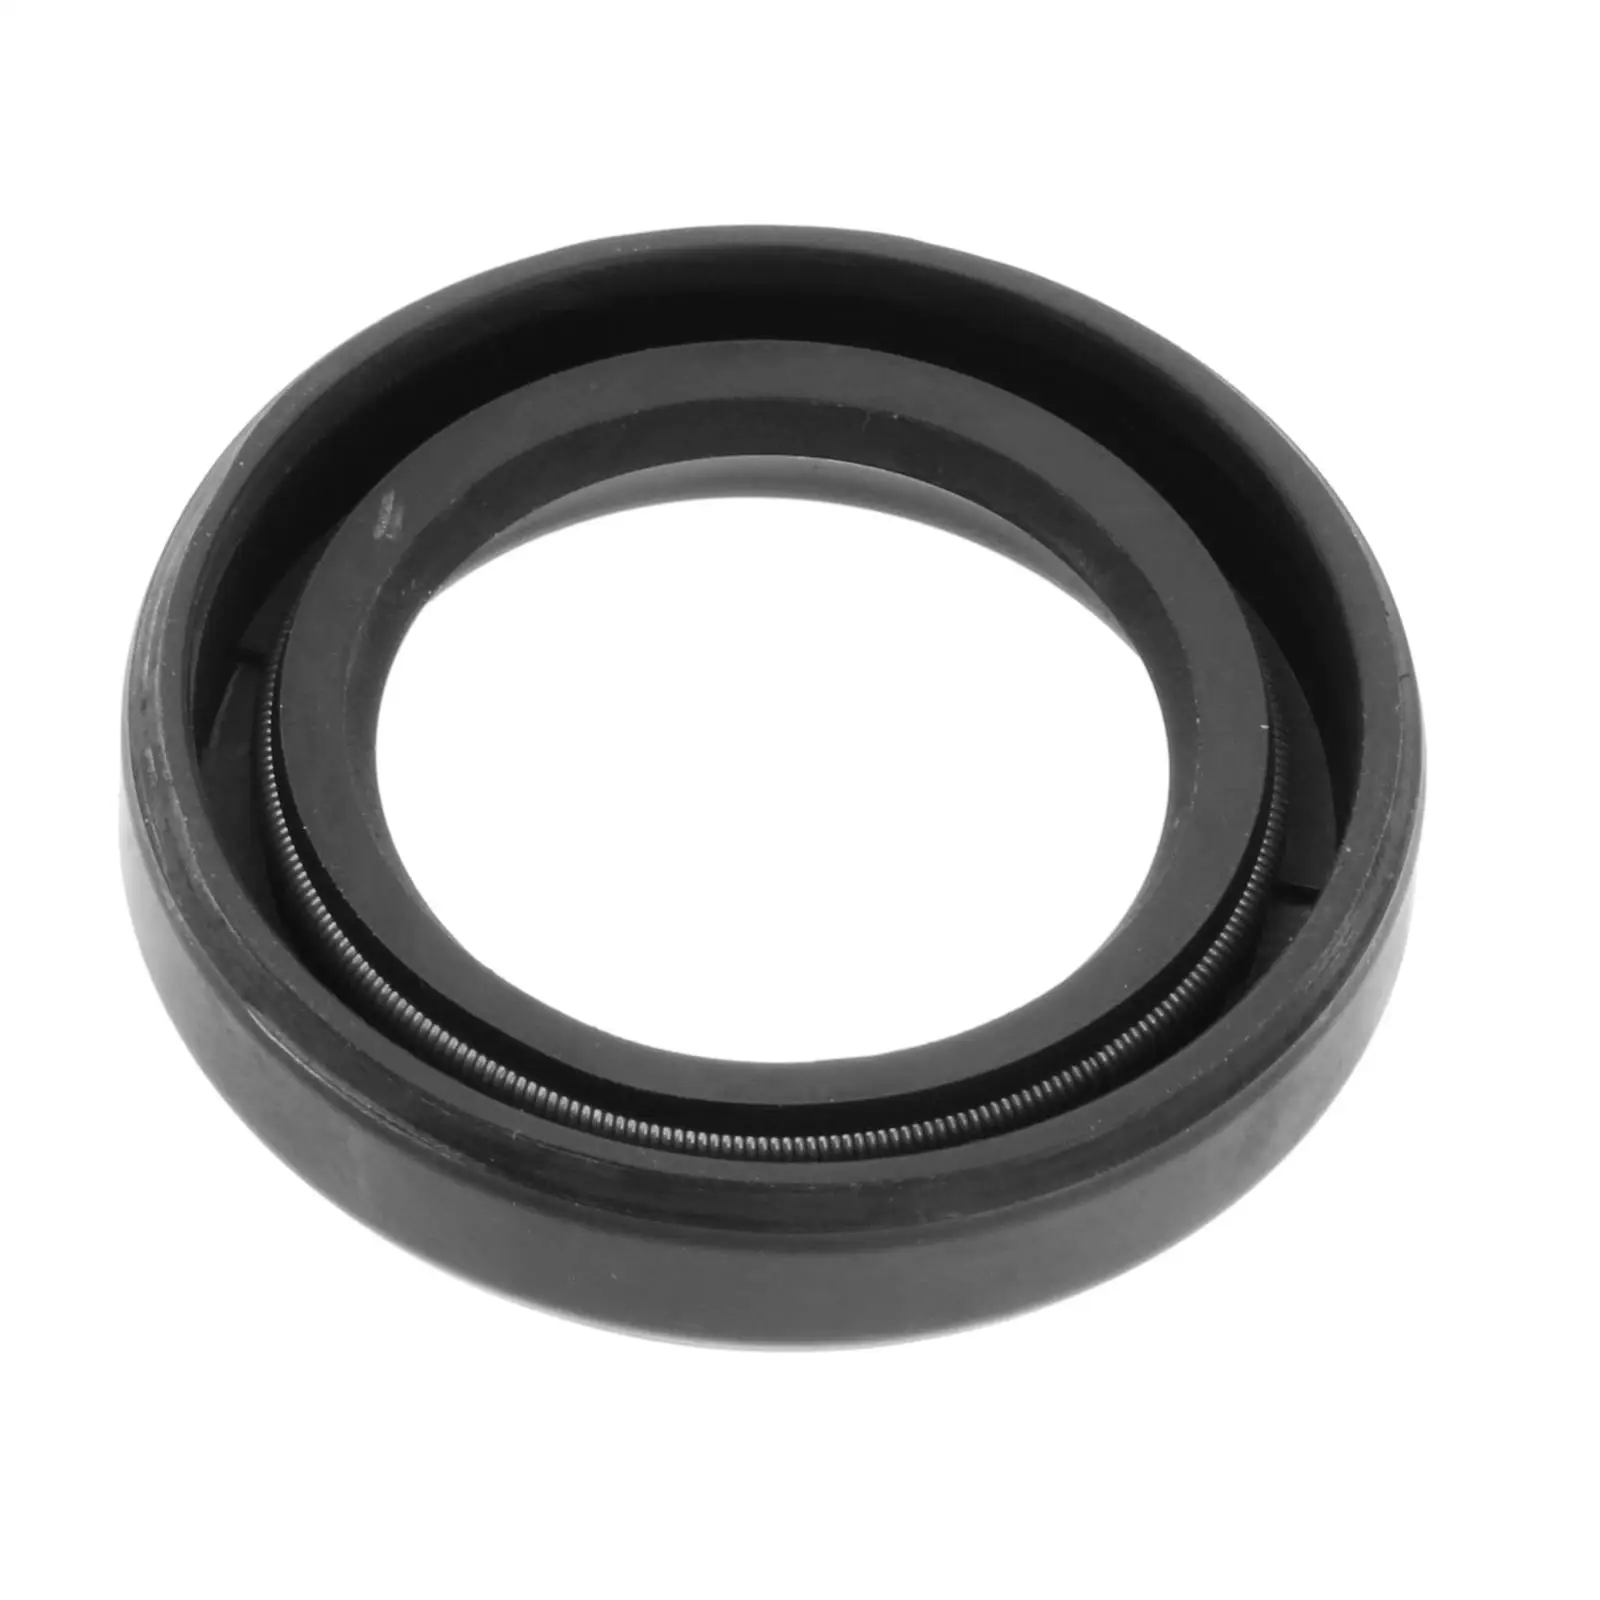 93101-20048 Oil Seal S-type Replaces for Yamaha Outboard Motor Parsun,Hidea Parts 8HP, 9HP, 9.9HP, 15HP, 20HP, 25HP